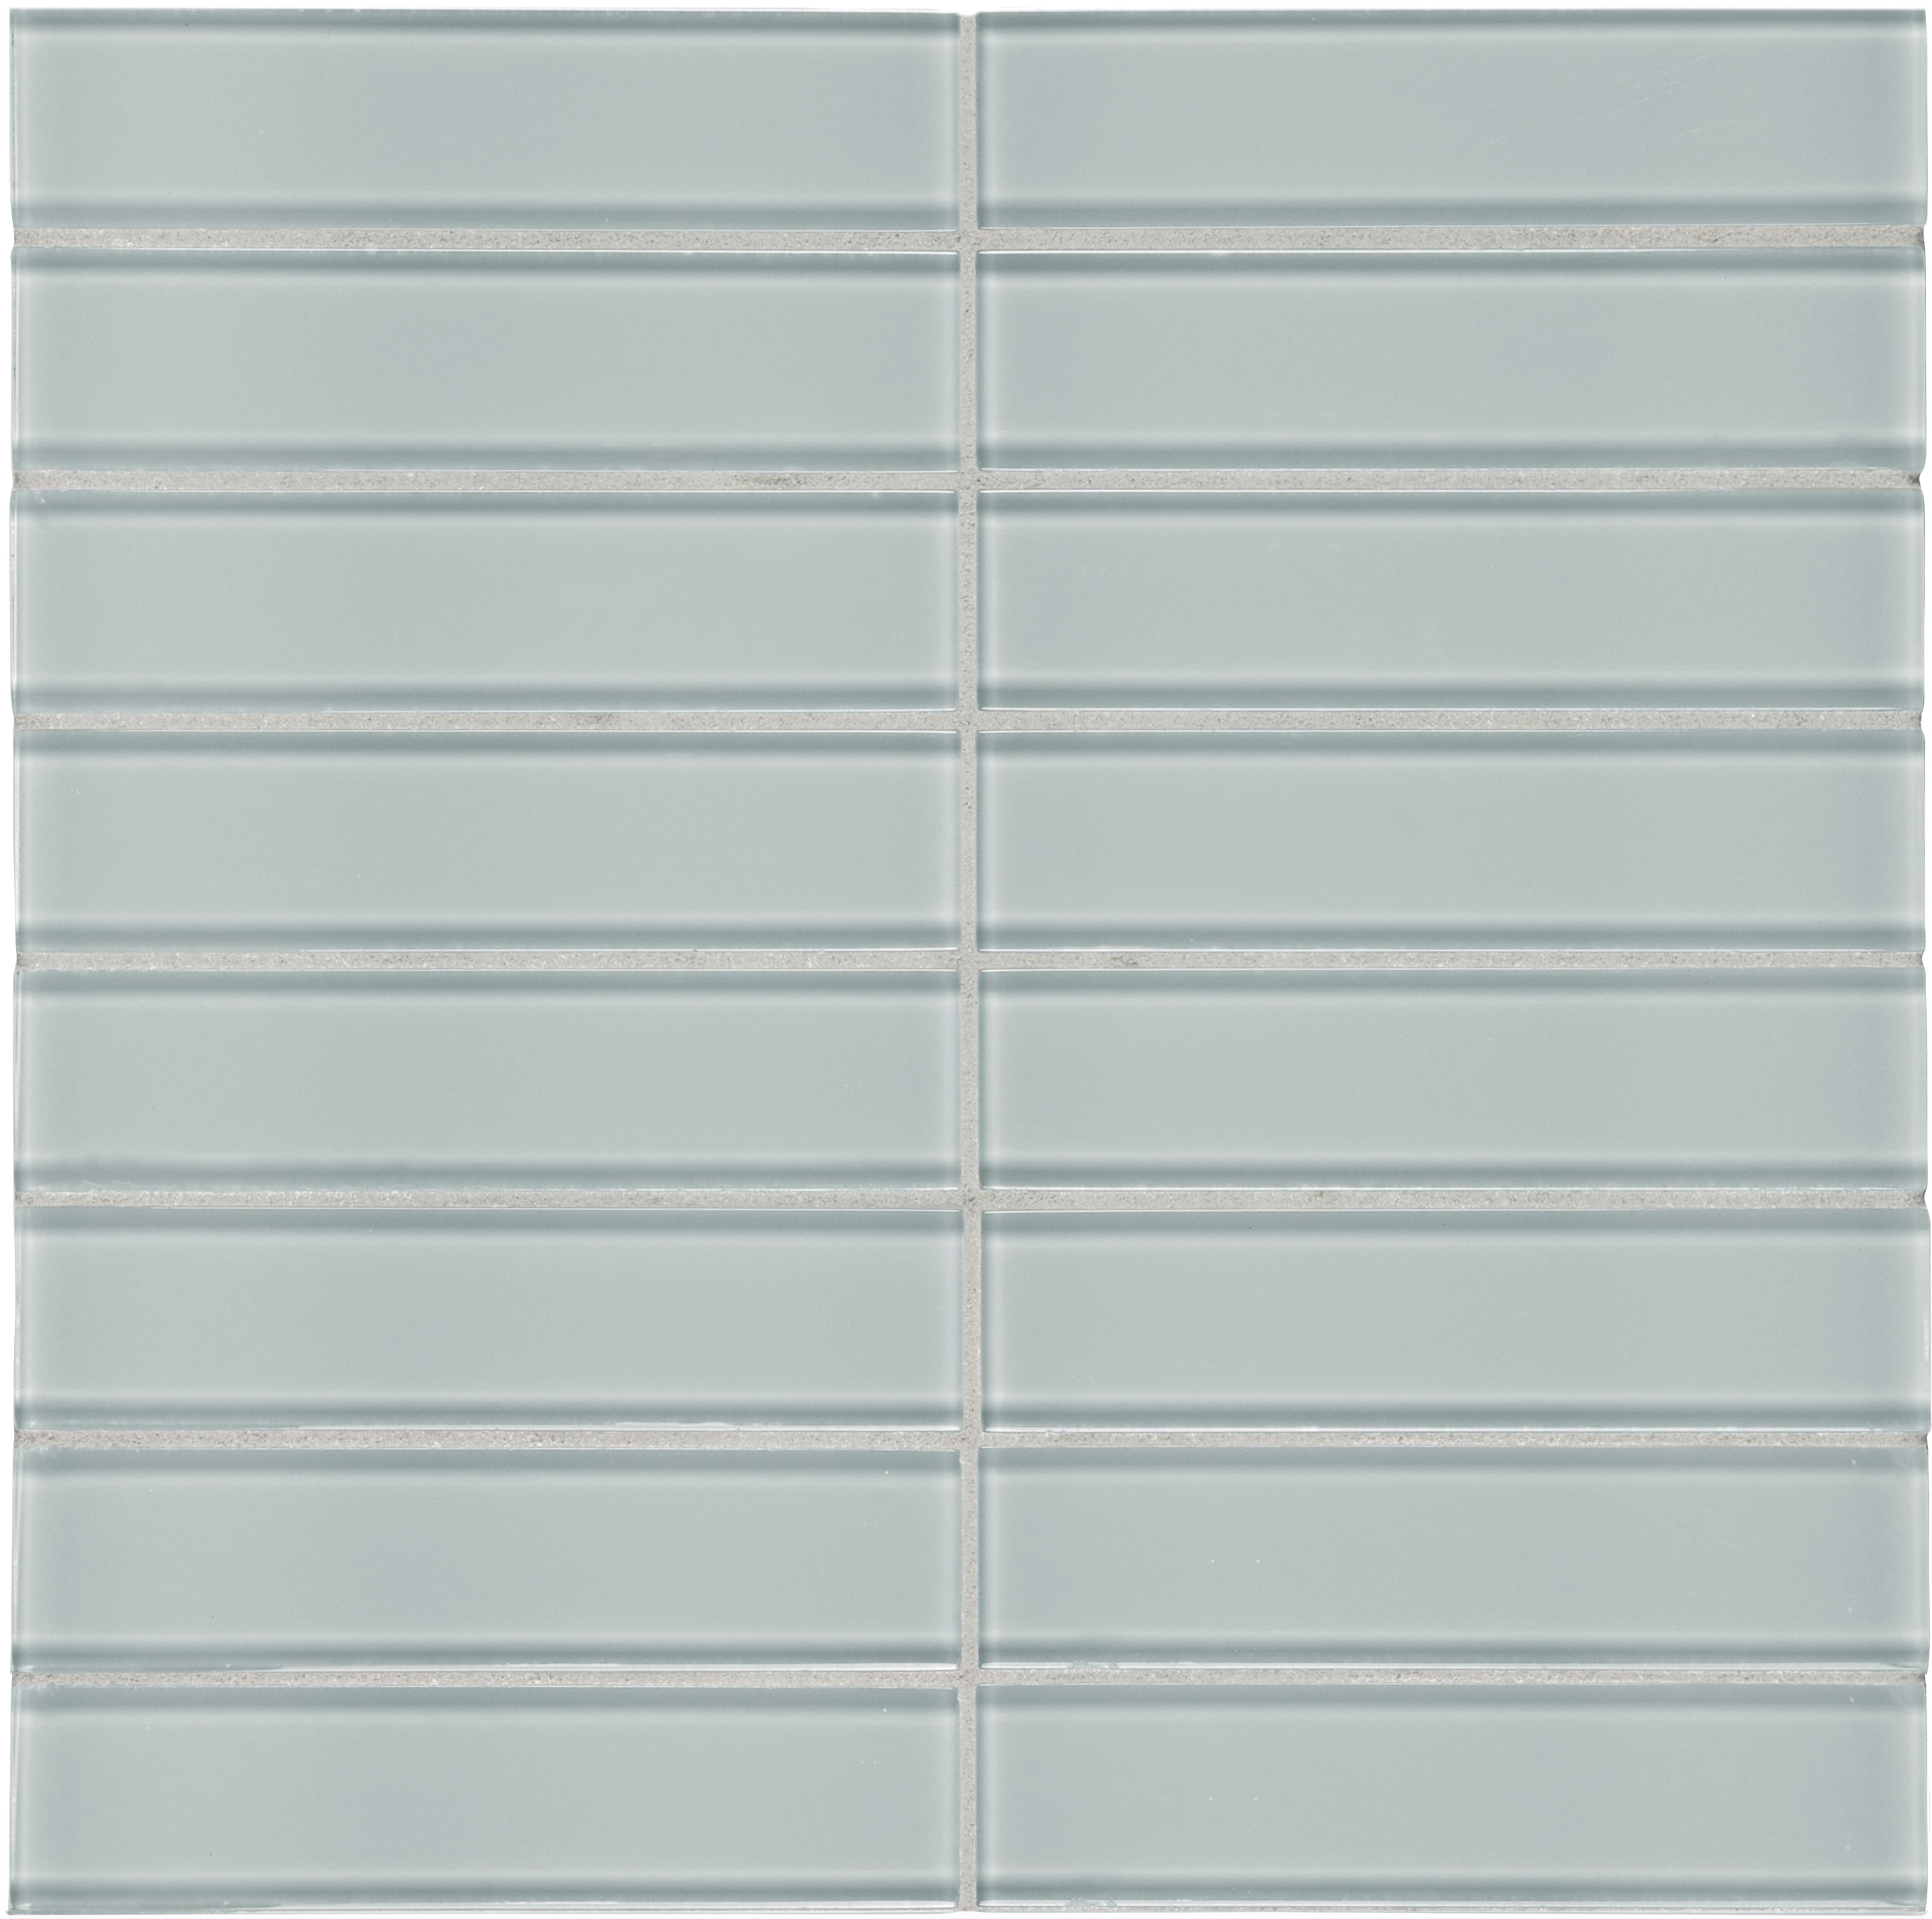 cloud straight stack 1&5x6-inch pattern fused glass mosaic from element anatolia collection distributed by surface group international glossy finish rounded edge mesh shape